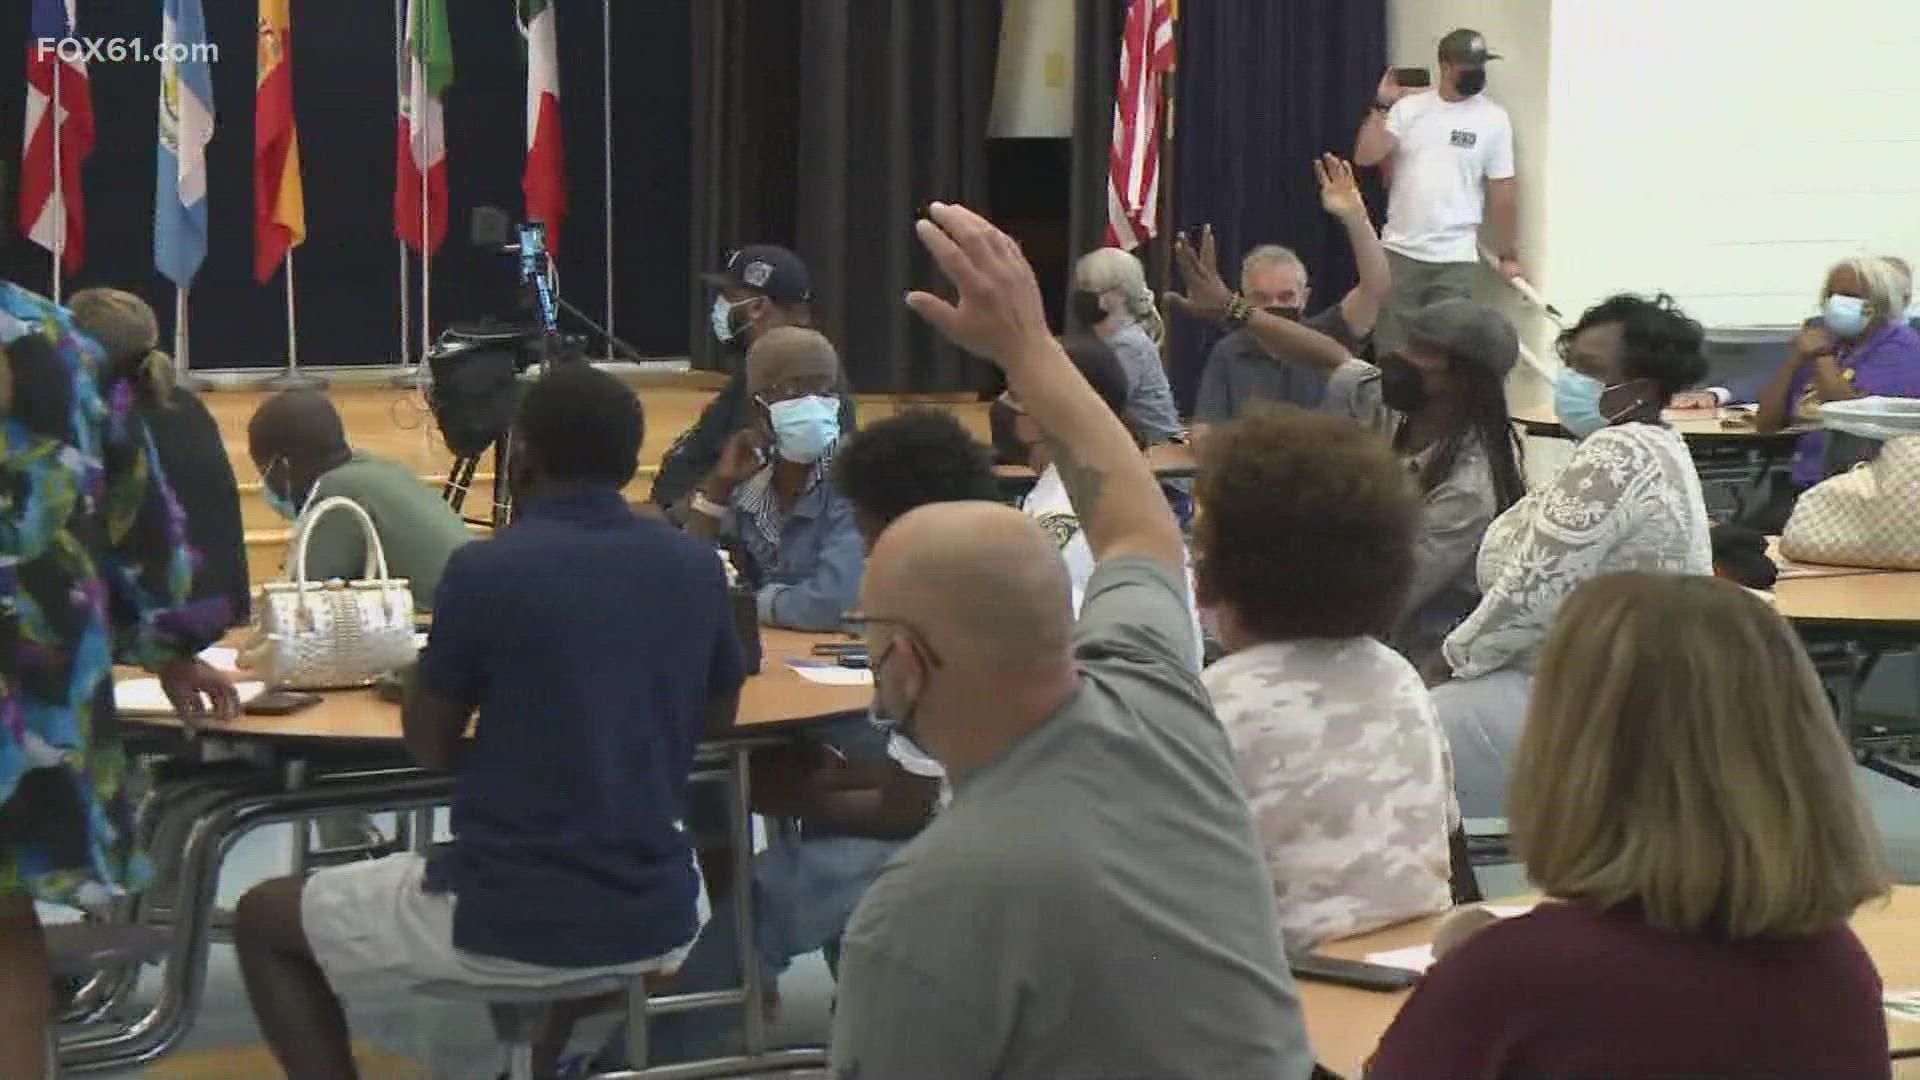 New haven residents are calling for an end to gun violence. They brought their concerns to Mayor Justin Elicker and the police chief at a community meeting.